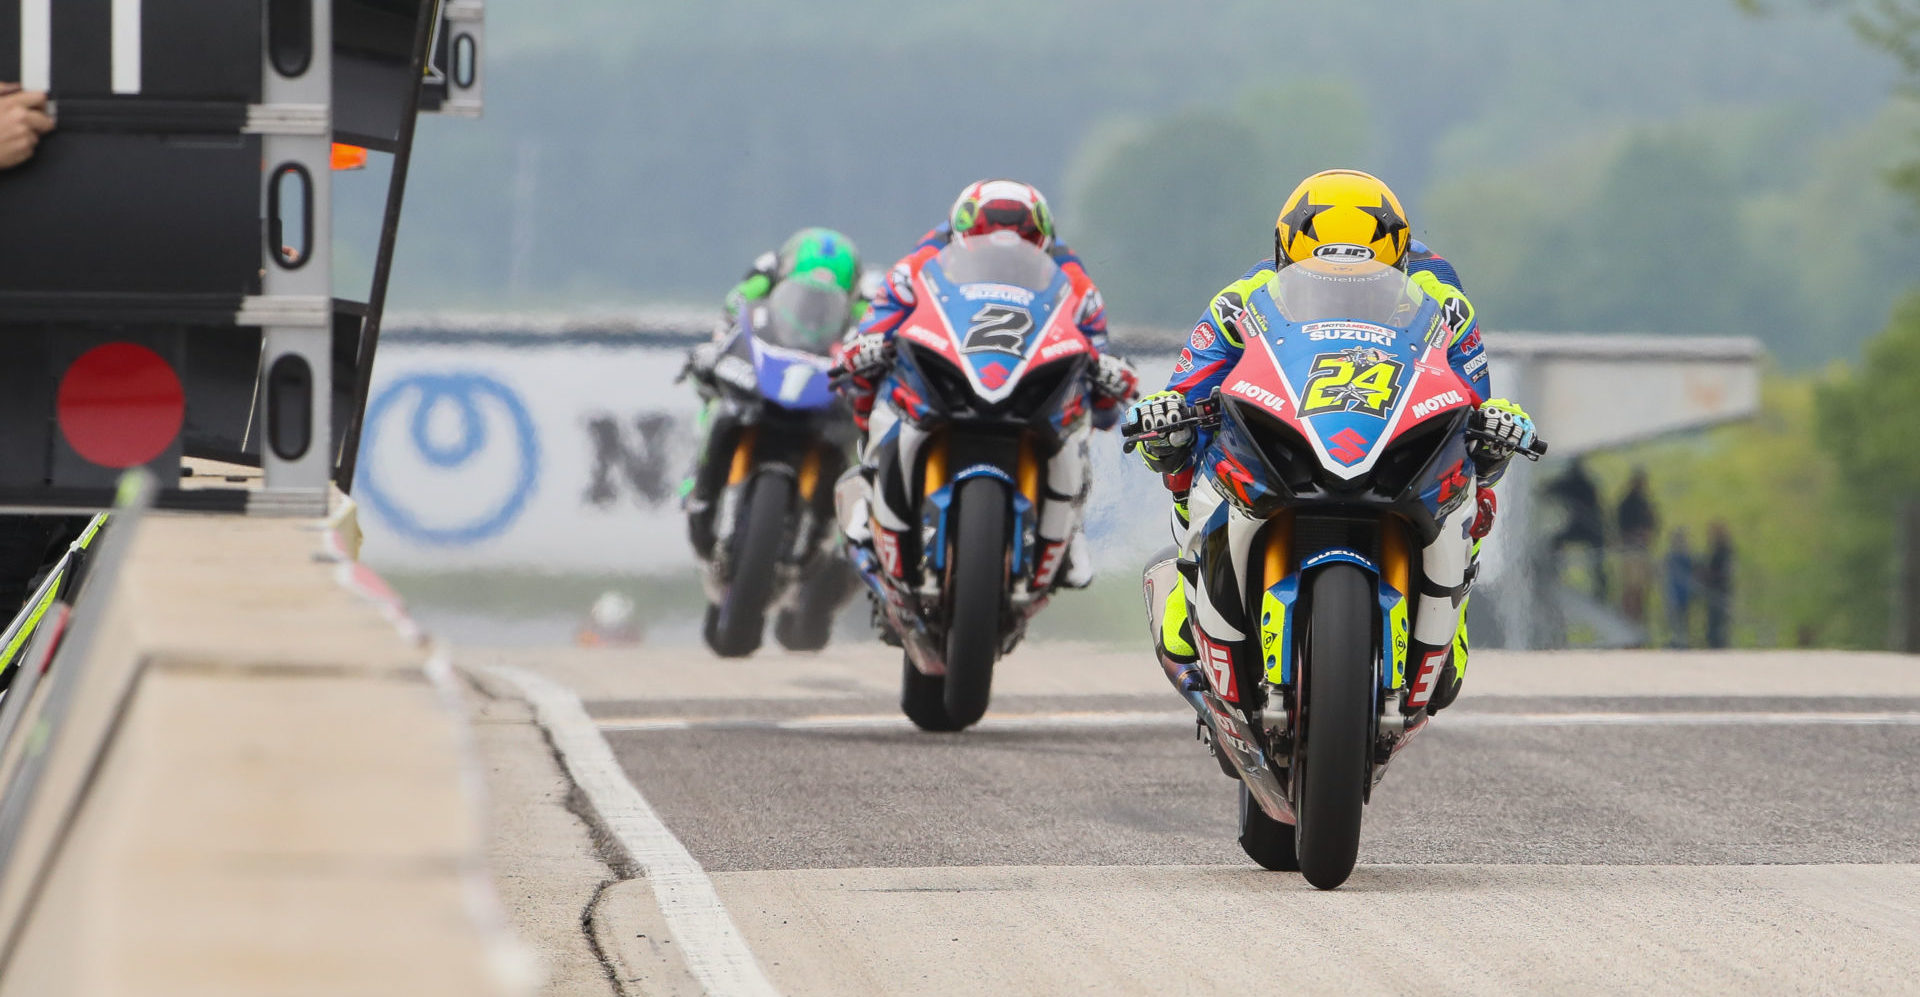 Action from MotoAmerica Superbike Race One at Road America in 2019. Photo by Brian J. Nelson.